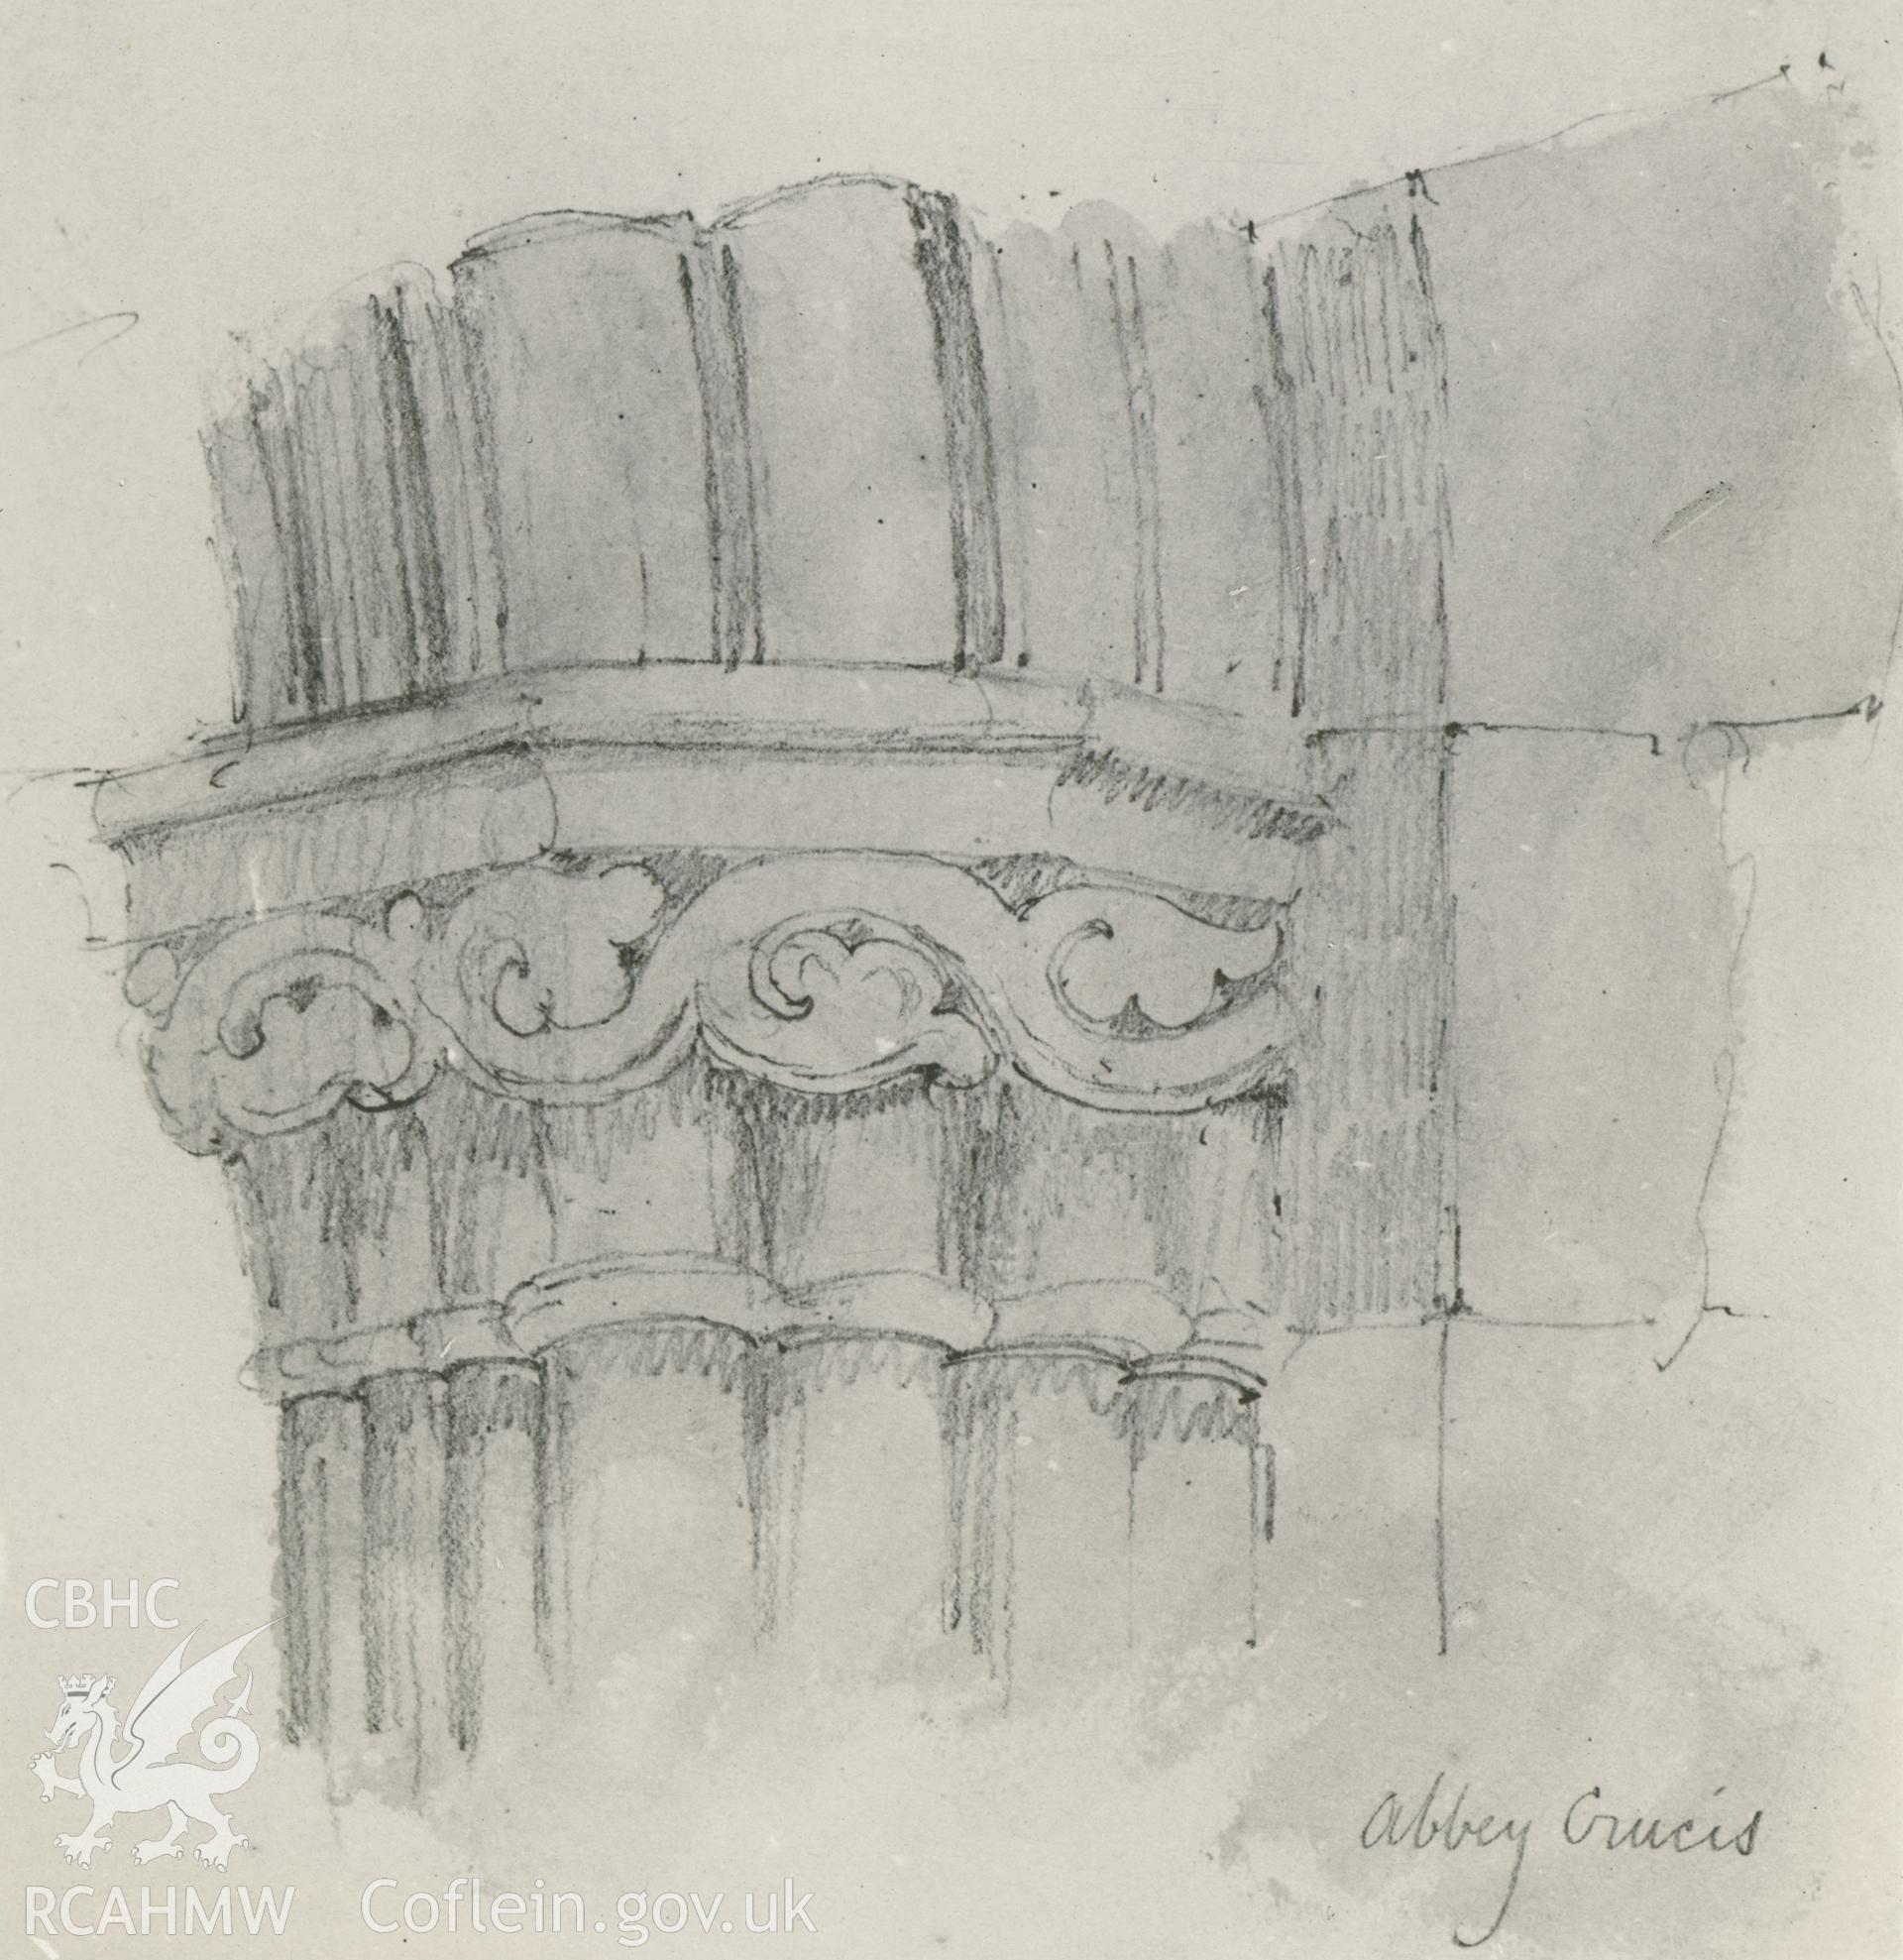 Photograph by Macbeth of an early pencil sketch showing detail of pier at Valle Crucis Abbey.